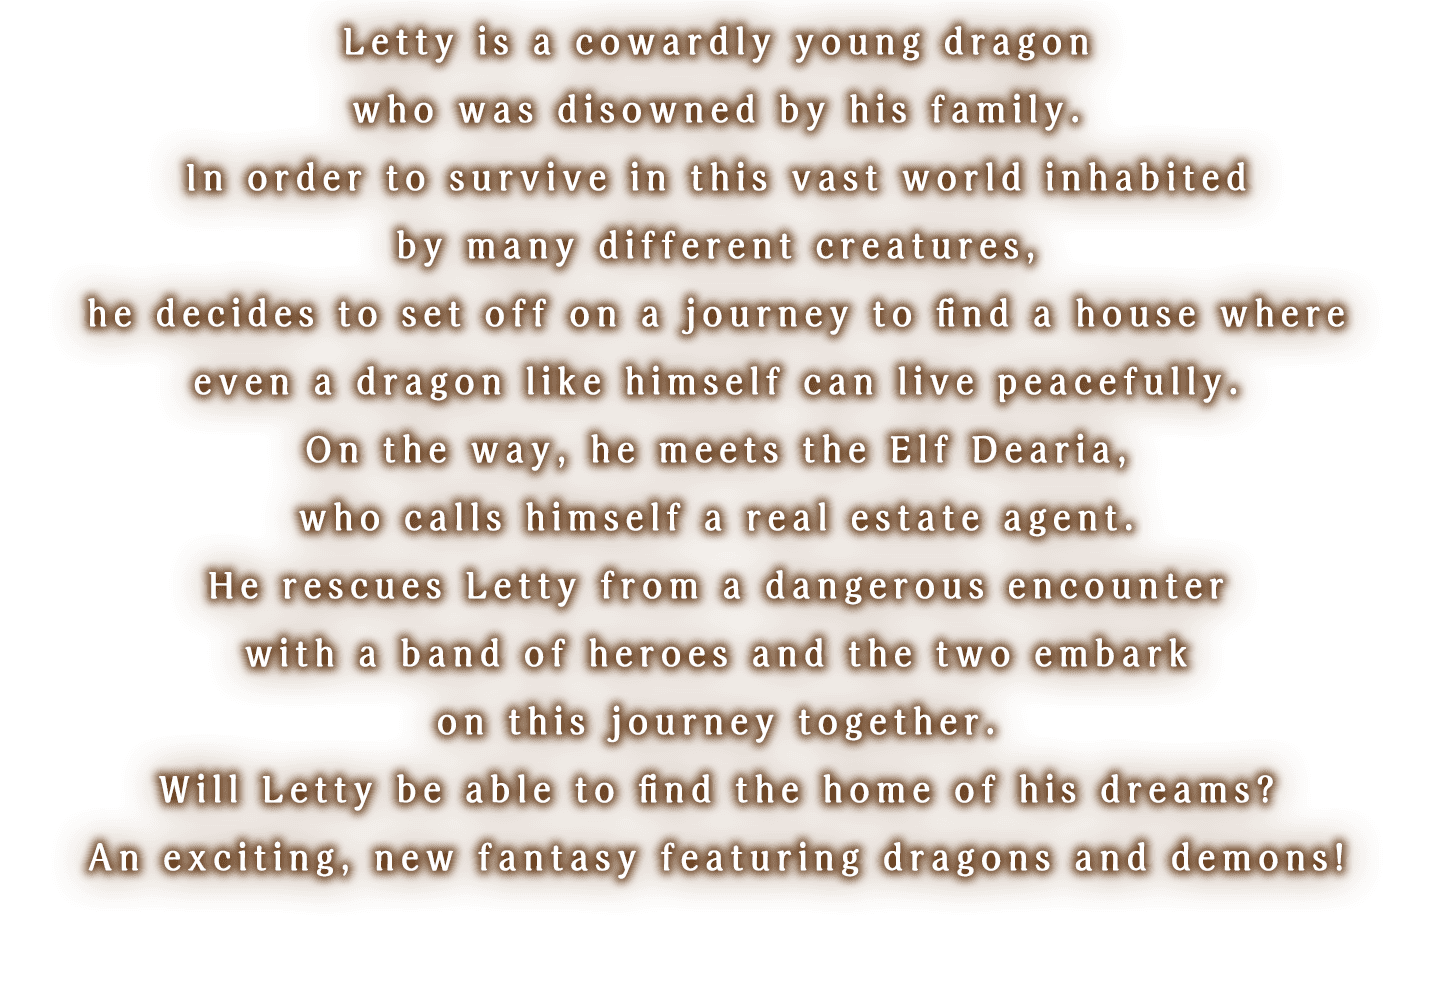 
                Letty is a cowardly young dragon who was disowned by his family.
                In order to survive in this vast world inhabited by many different creatures, he decides to set off on a journey to find a house where even a dragon like himself can live peacefully.
                On the way, he meets the Elf Dearia, who calls himself a real estate agent.
                He rescues Letty from a dangerous encounter with a band of heroes and the two embark on this journey together.
                Will Letty be able to find the home of his dreams?
                An exciting, new fantasy featuring dragons and demons!
                